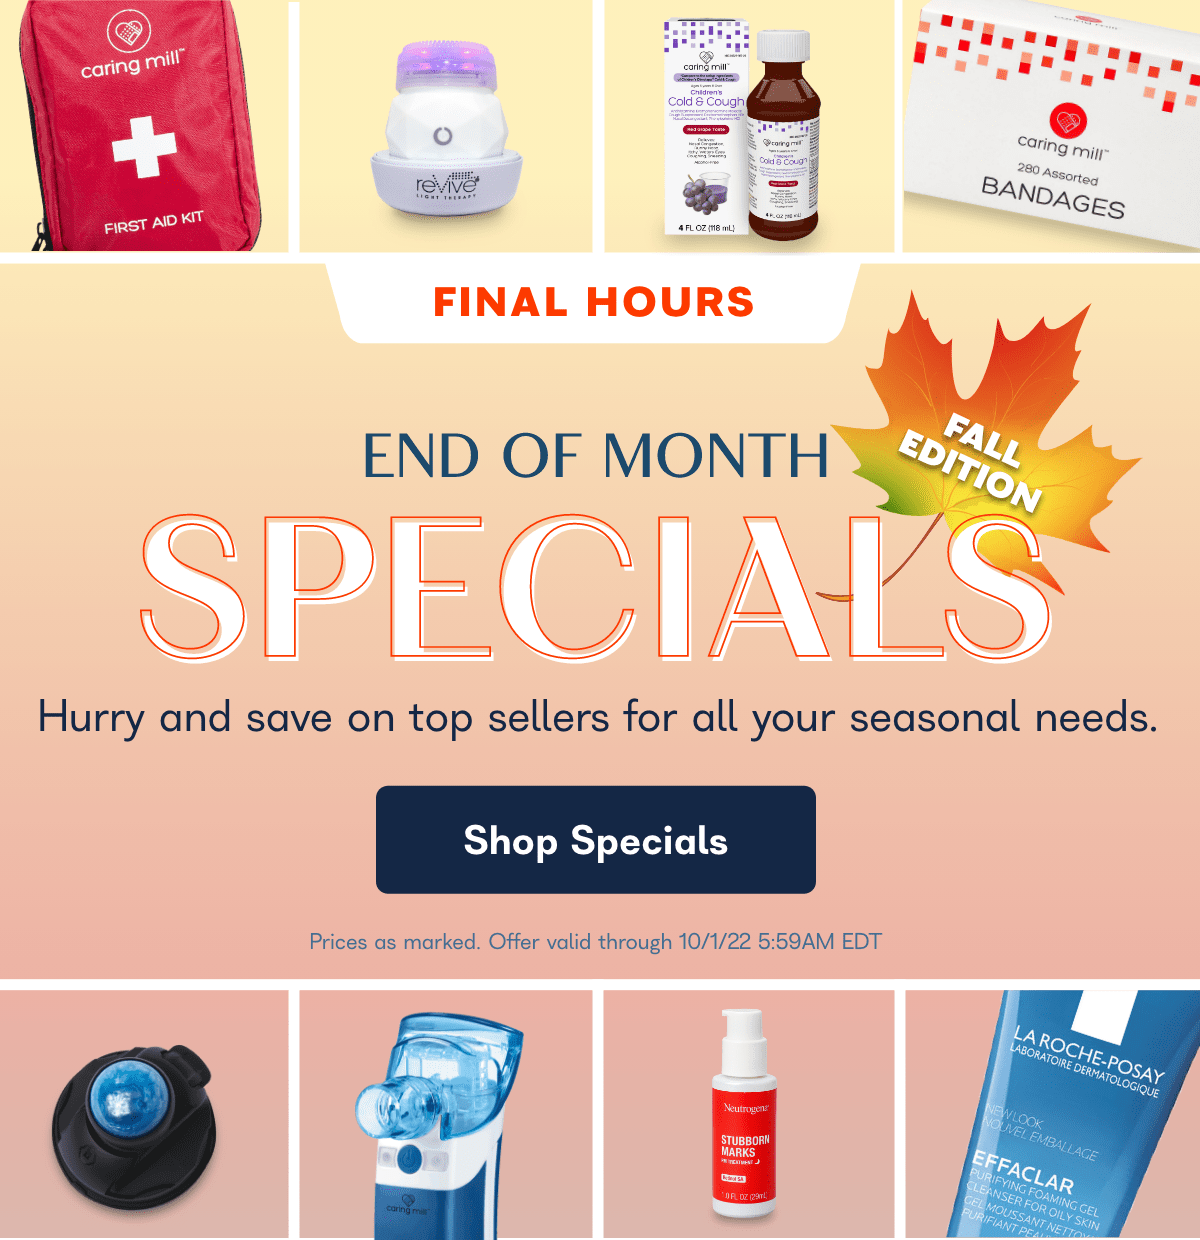  FINAL HOURS END OF MONTH 2IRCIY Hurry and save on top sellers for all your seasonal needs. Shop Specials Prices as marked. Offer valid through 10122 5:59AM EDT 